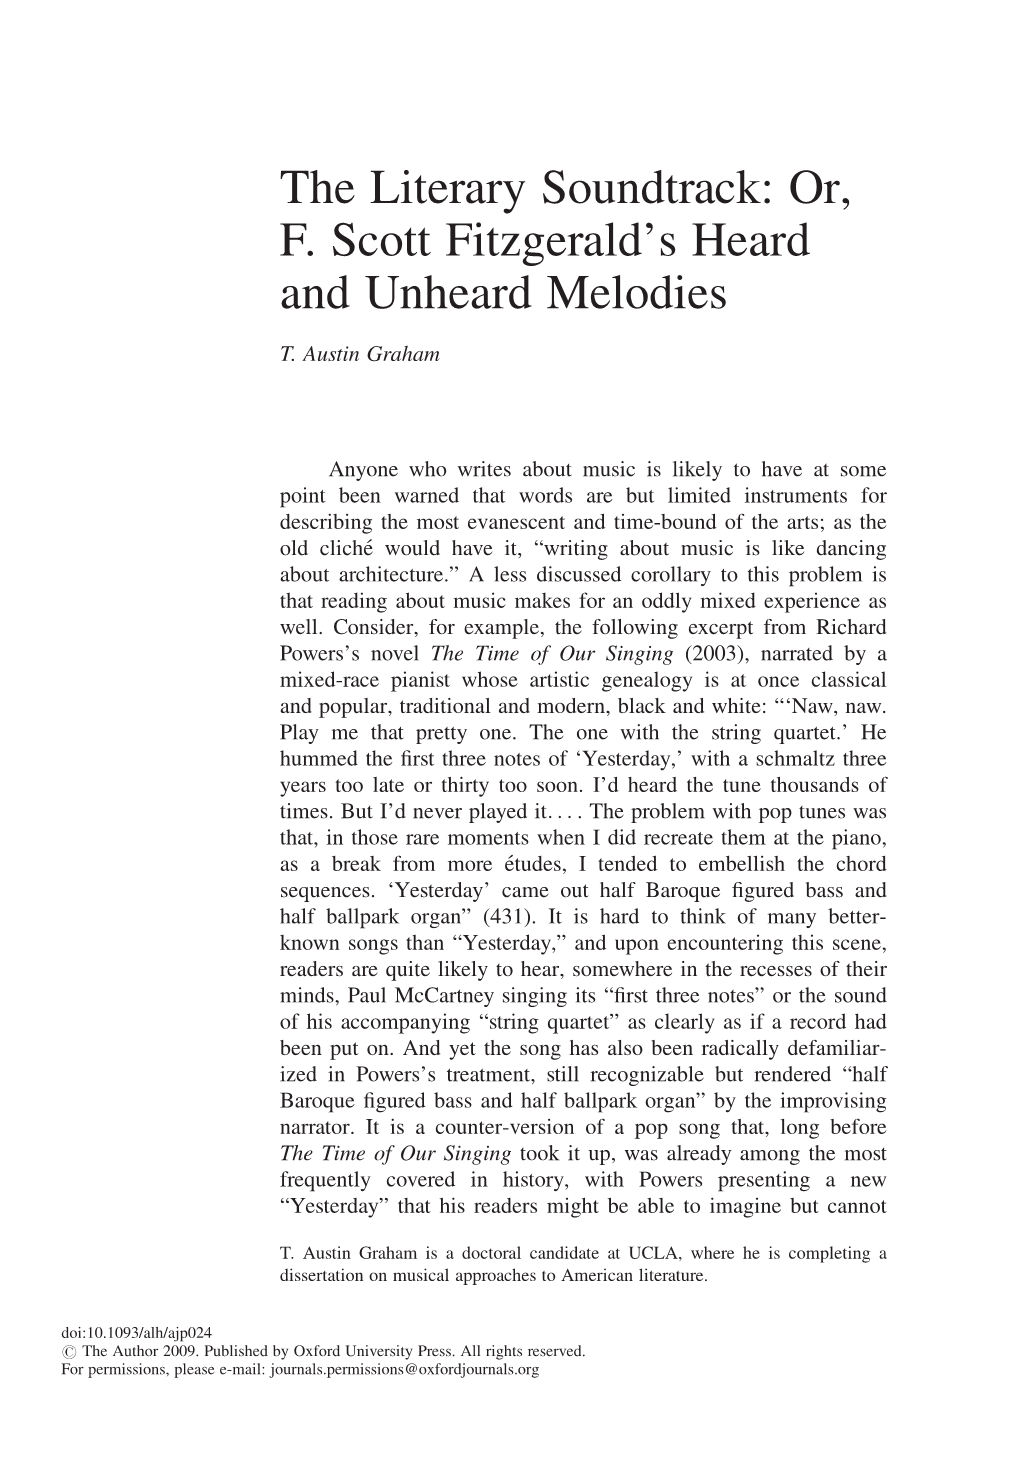 The Literary Soundtrack: Or, F. Scott Fitzgerald's Heard and Unheard Melodies